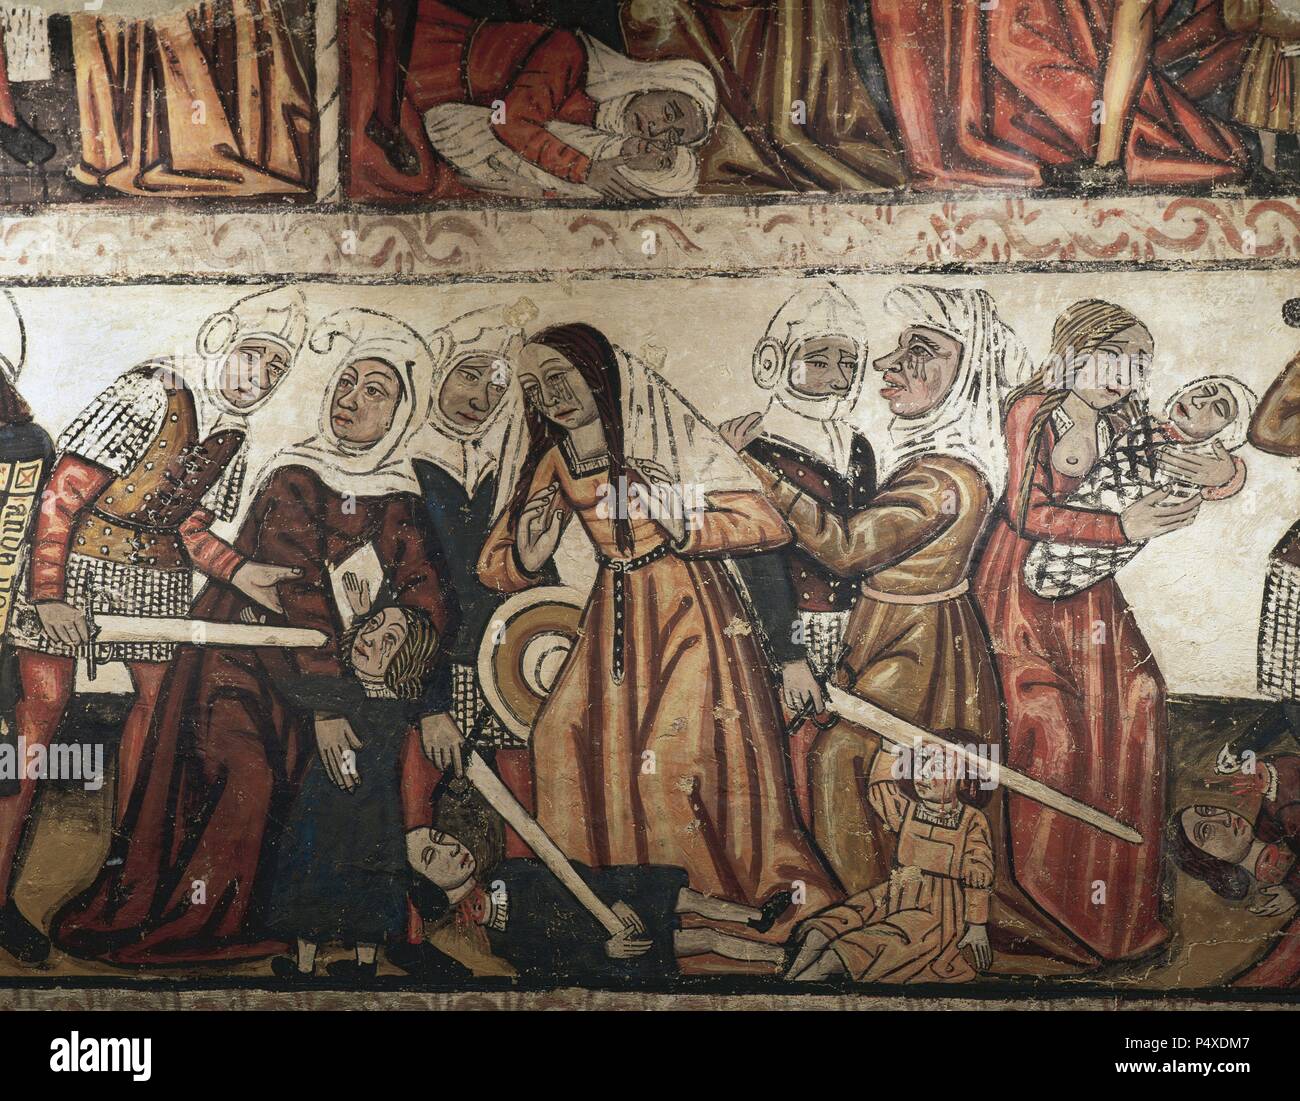 Massacre of the Innocents. Mural painting dating from the fourteenth century. Central nave of the Mondonedo Cathedral. Province of Lugo. Galicia. Spain. Stock Photo